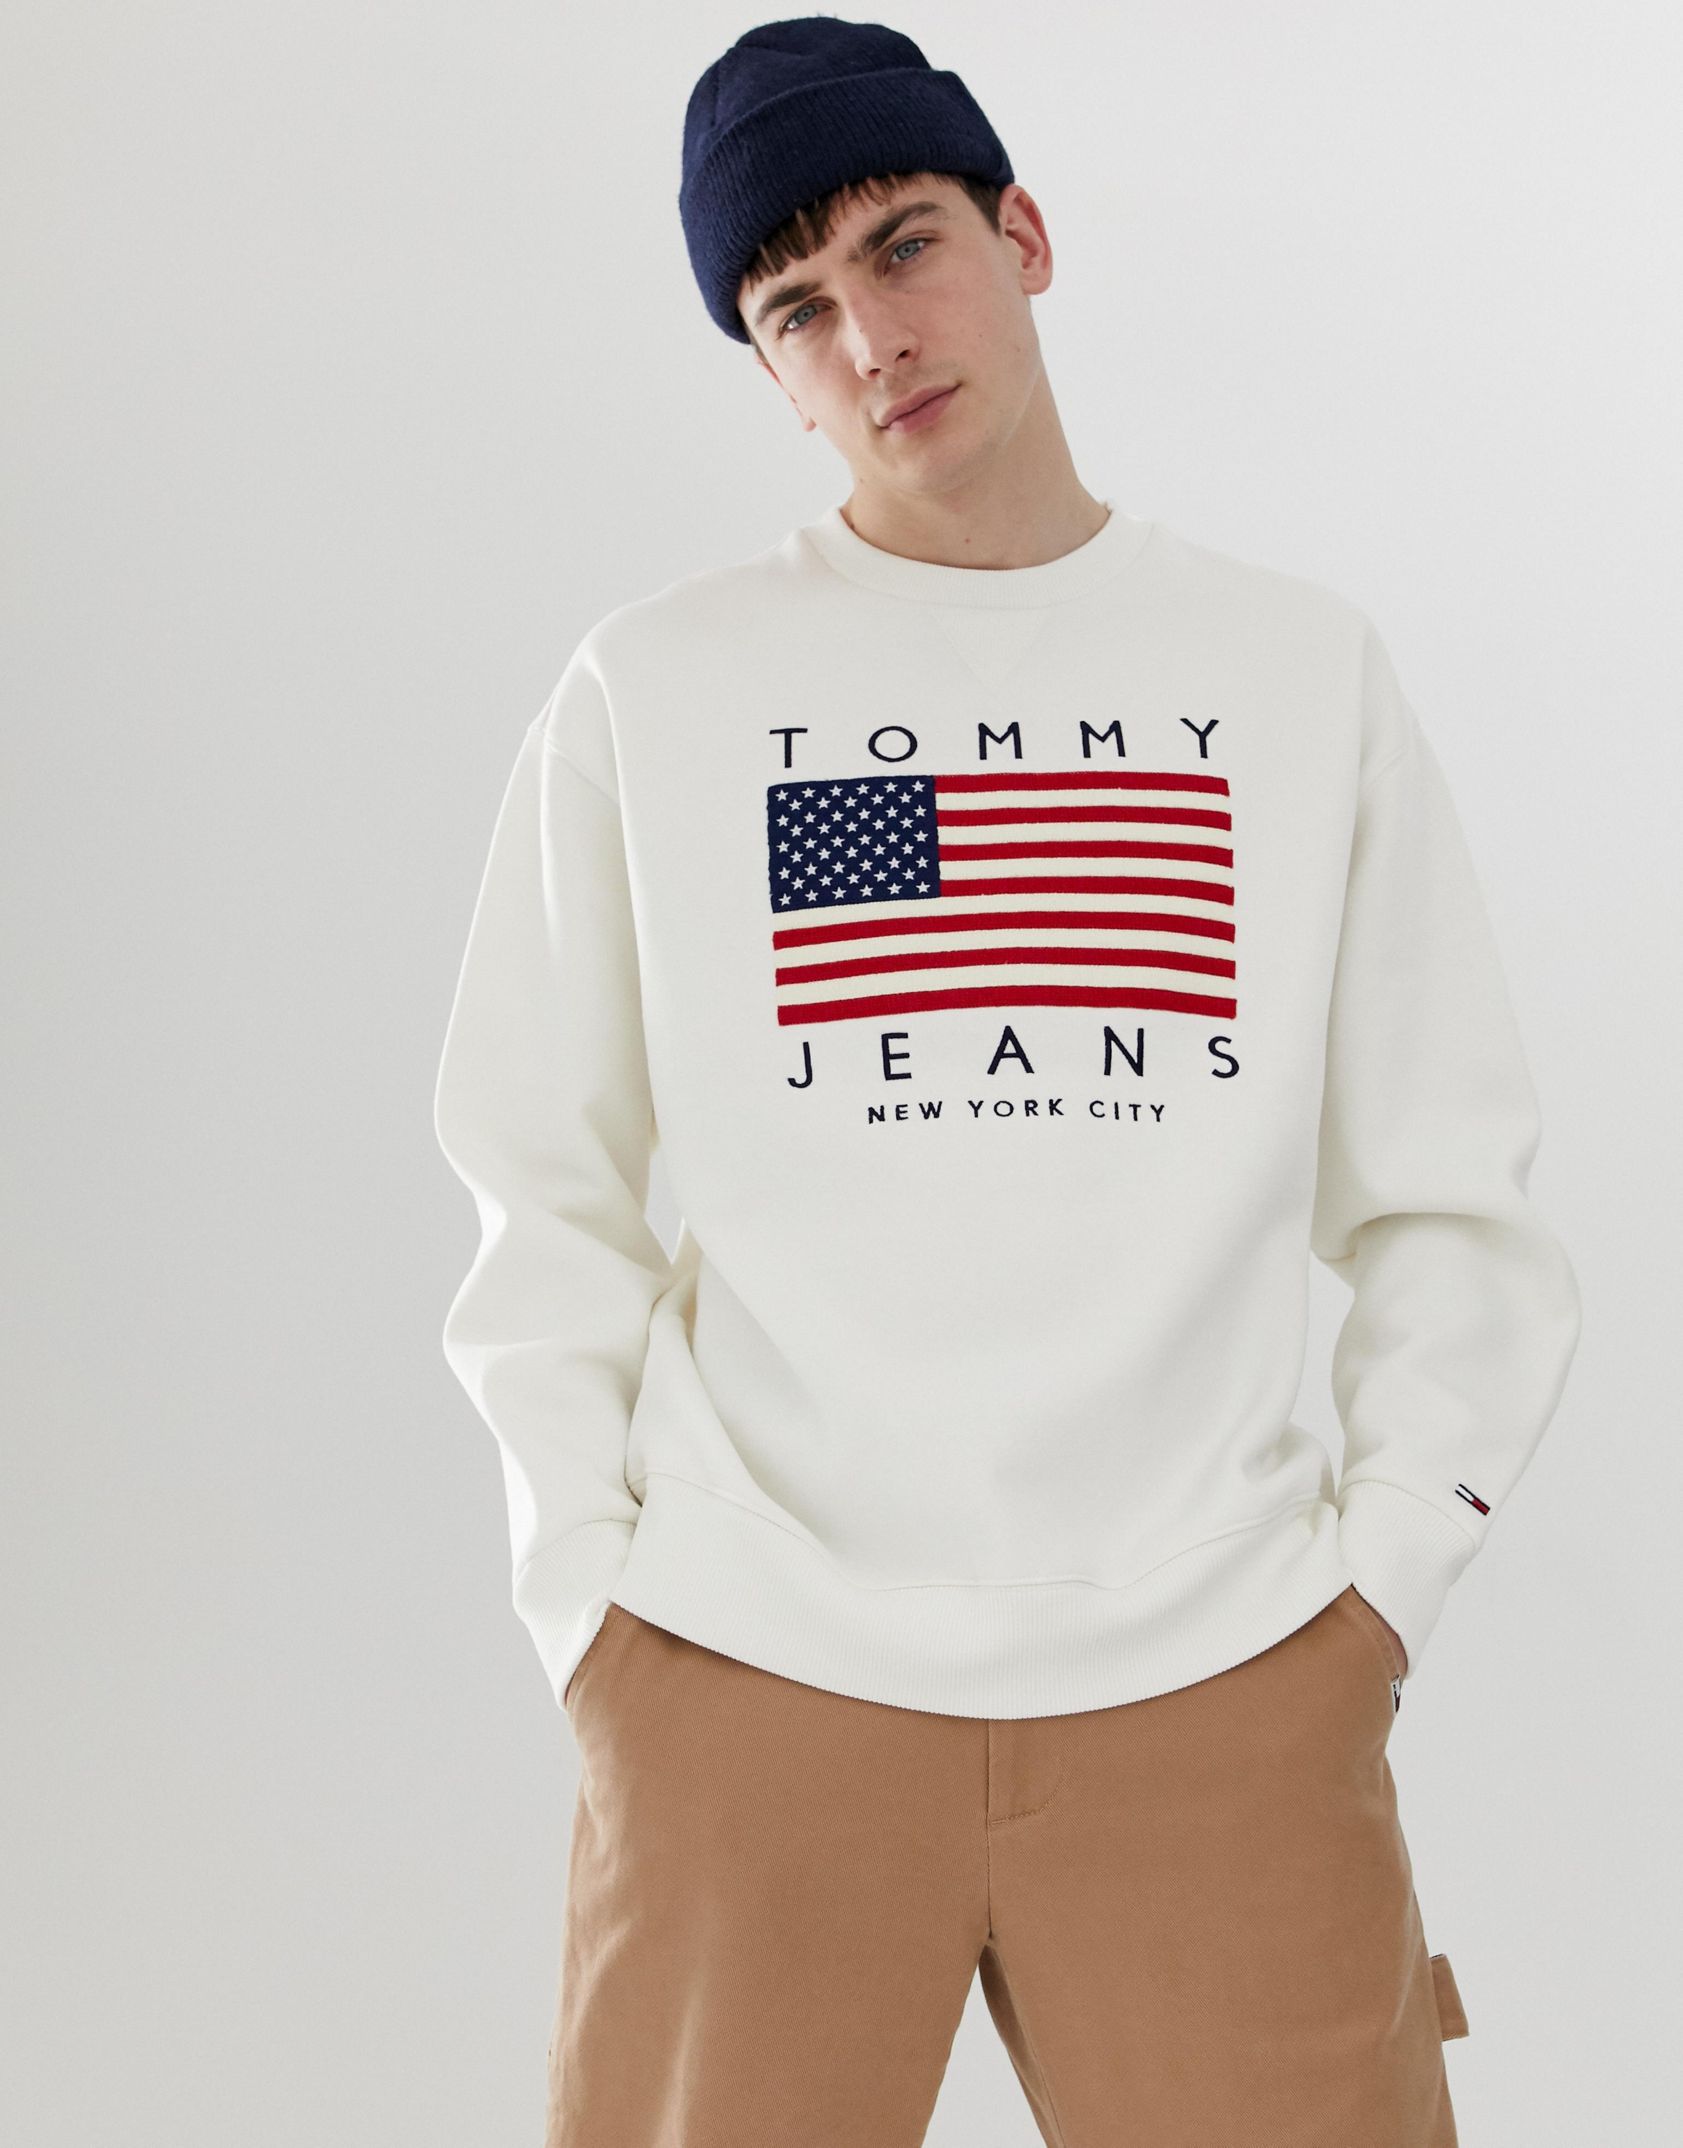 Tommy hilfiger usa. Толстовка белая Tommy Hilfiger Tommy Jeans. Tommy Hilfiger Jeans свитшот. Tommy Jeans Capsule collection Flag Print Sweatshirt. Tommy Hilfiger Capsule collection Flag Crew Neck Sweatshirt.